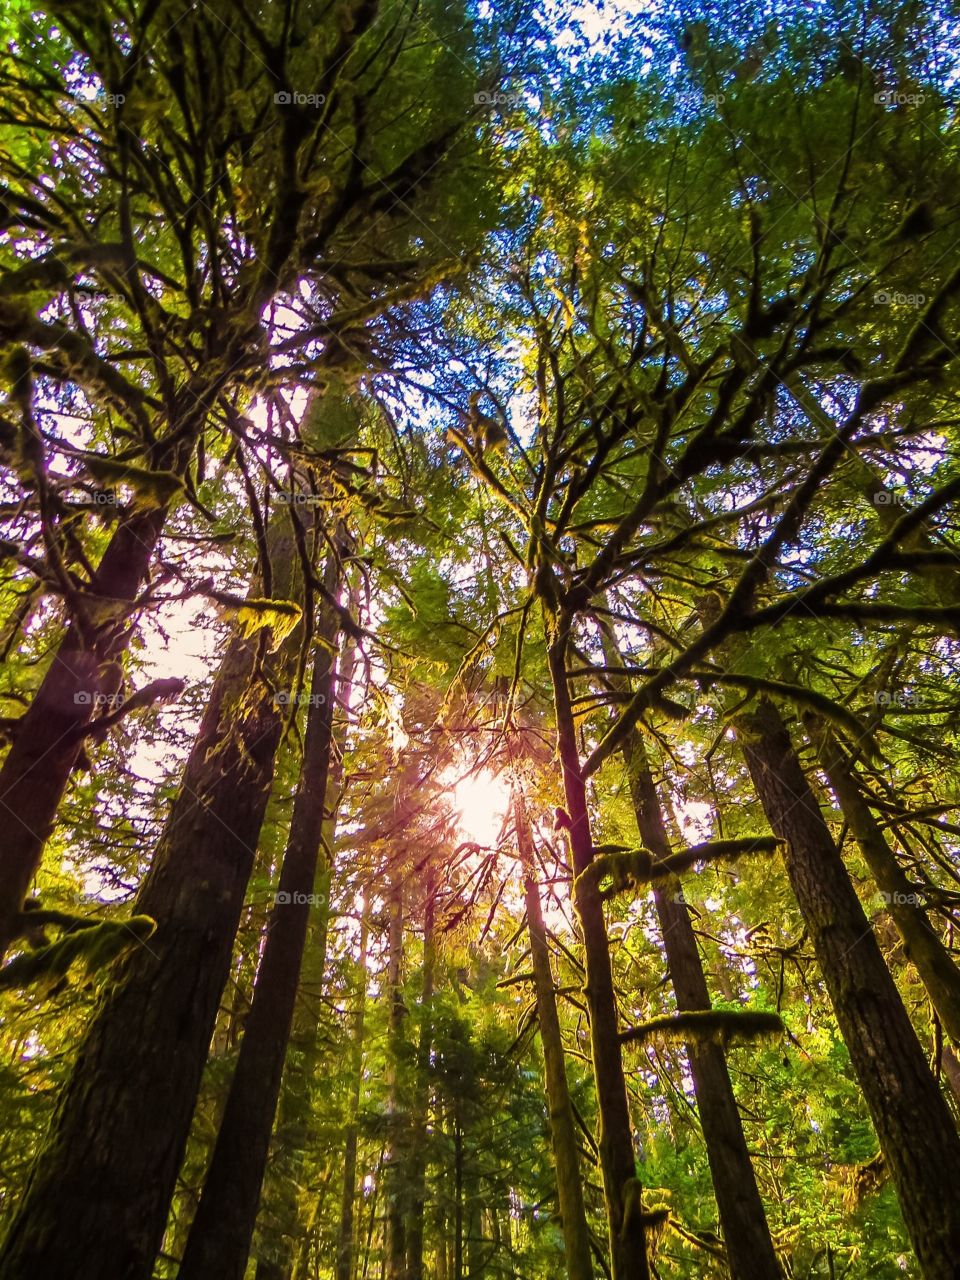 Sun shining through the forest in the Pacific Northwest.